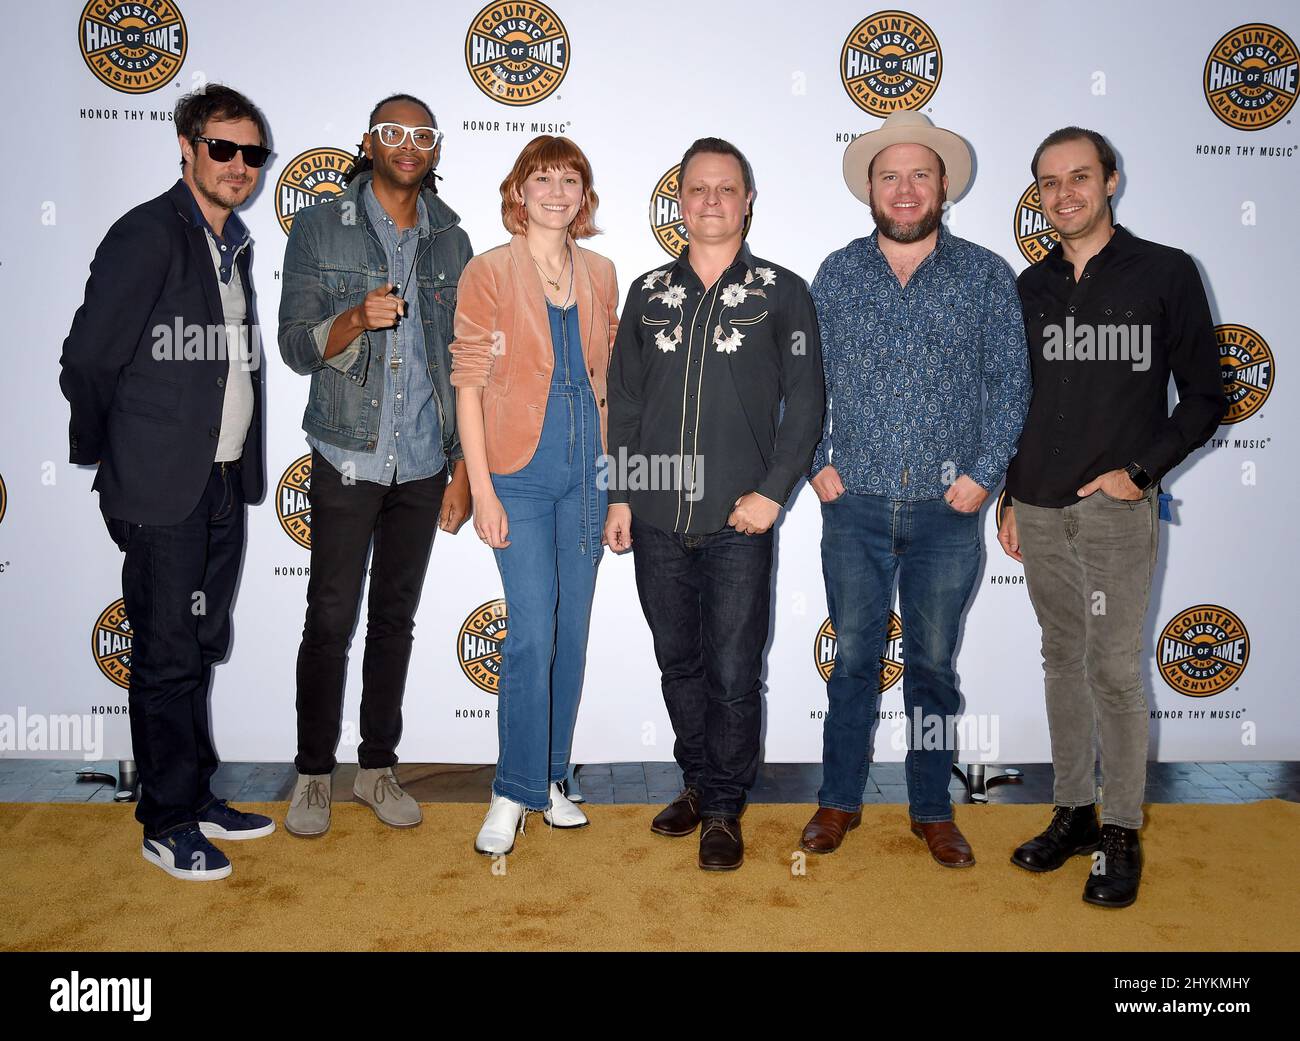 Cory Younts, Jerry Pendergrast, Molly Tuttle, Morgan Jahnig, Critter Fuqua, Ketch Secor of Old Crow Medicine Show bei der Verleihung der Country Music Hall of Fame Medallion 2019 in der Country Music Hall of Fame & Museum am 20. Oktober 2019 in Nashville, USA. Stockfoto